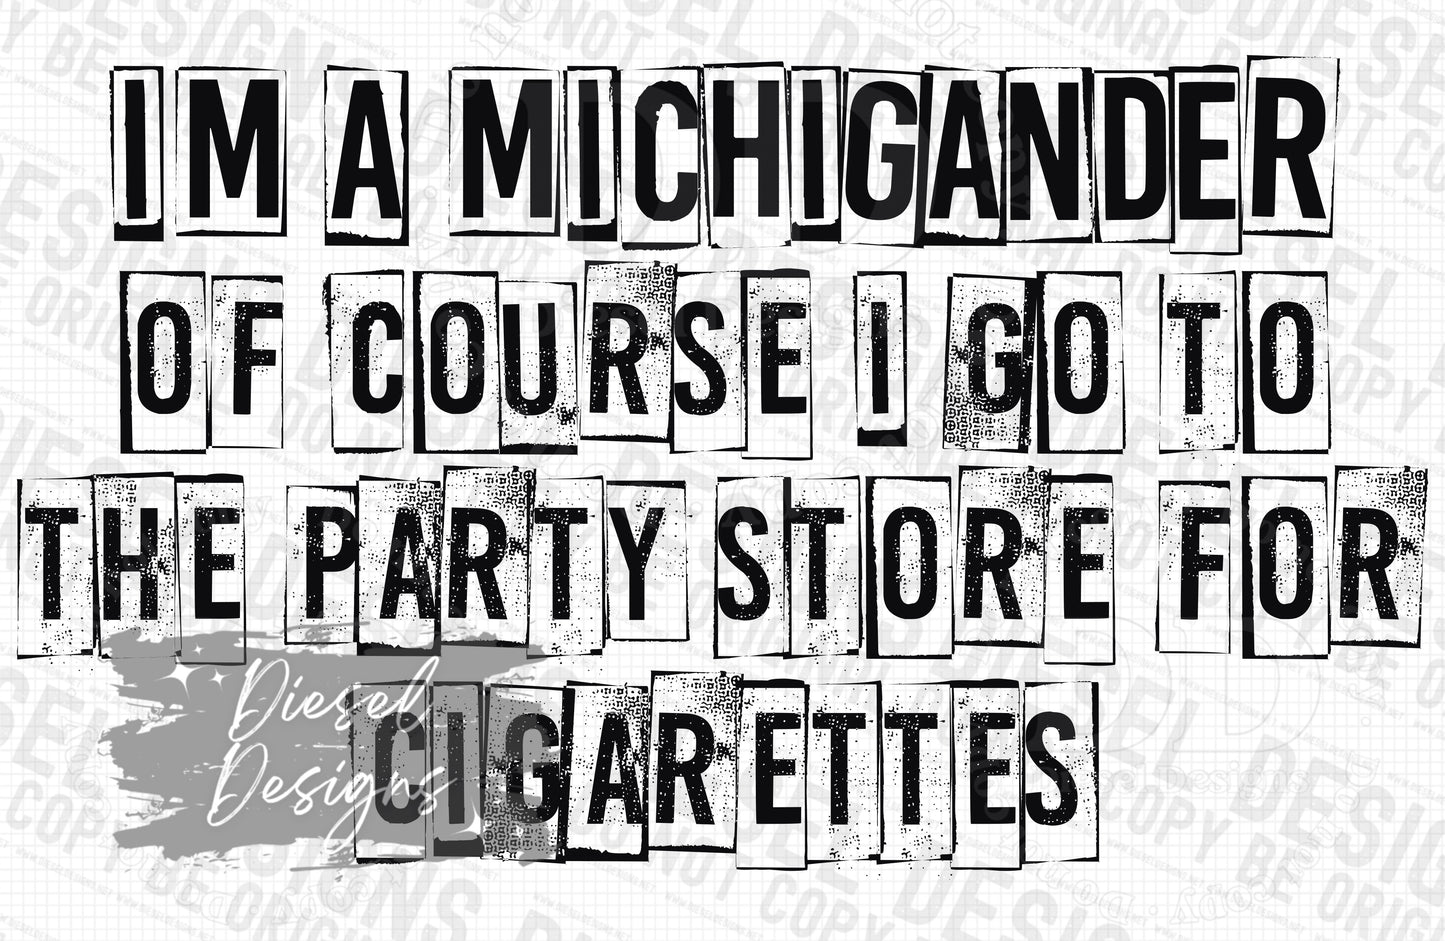 I'm a Michigander of course I go to the party store for cigarettes | 300 DPI | Transparent PNG | Digital File Only